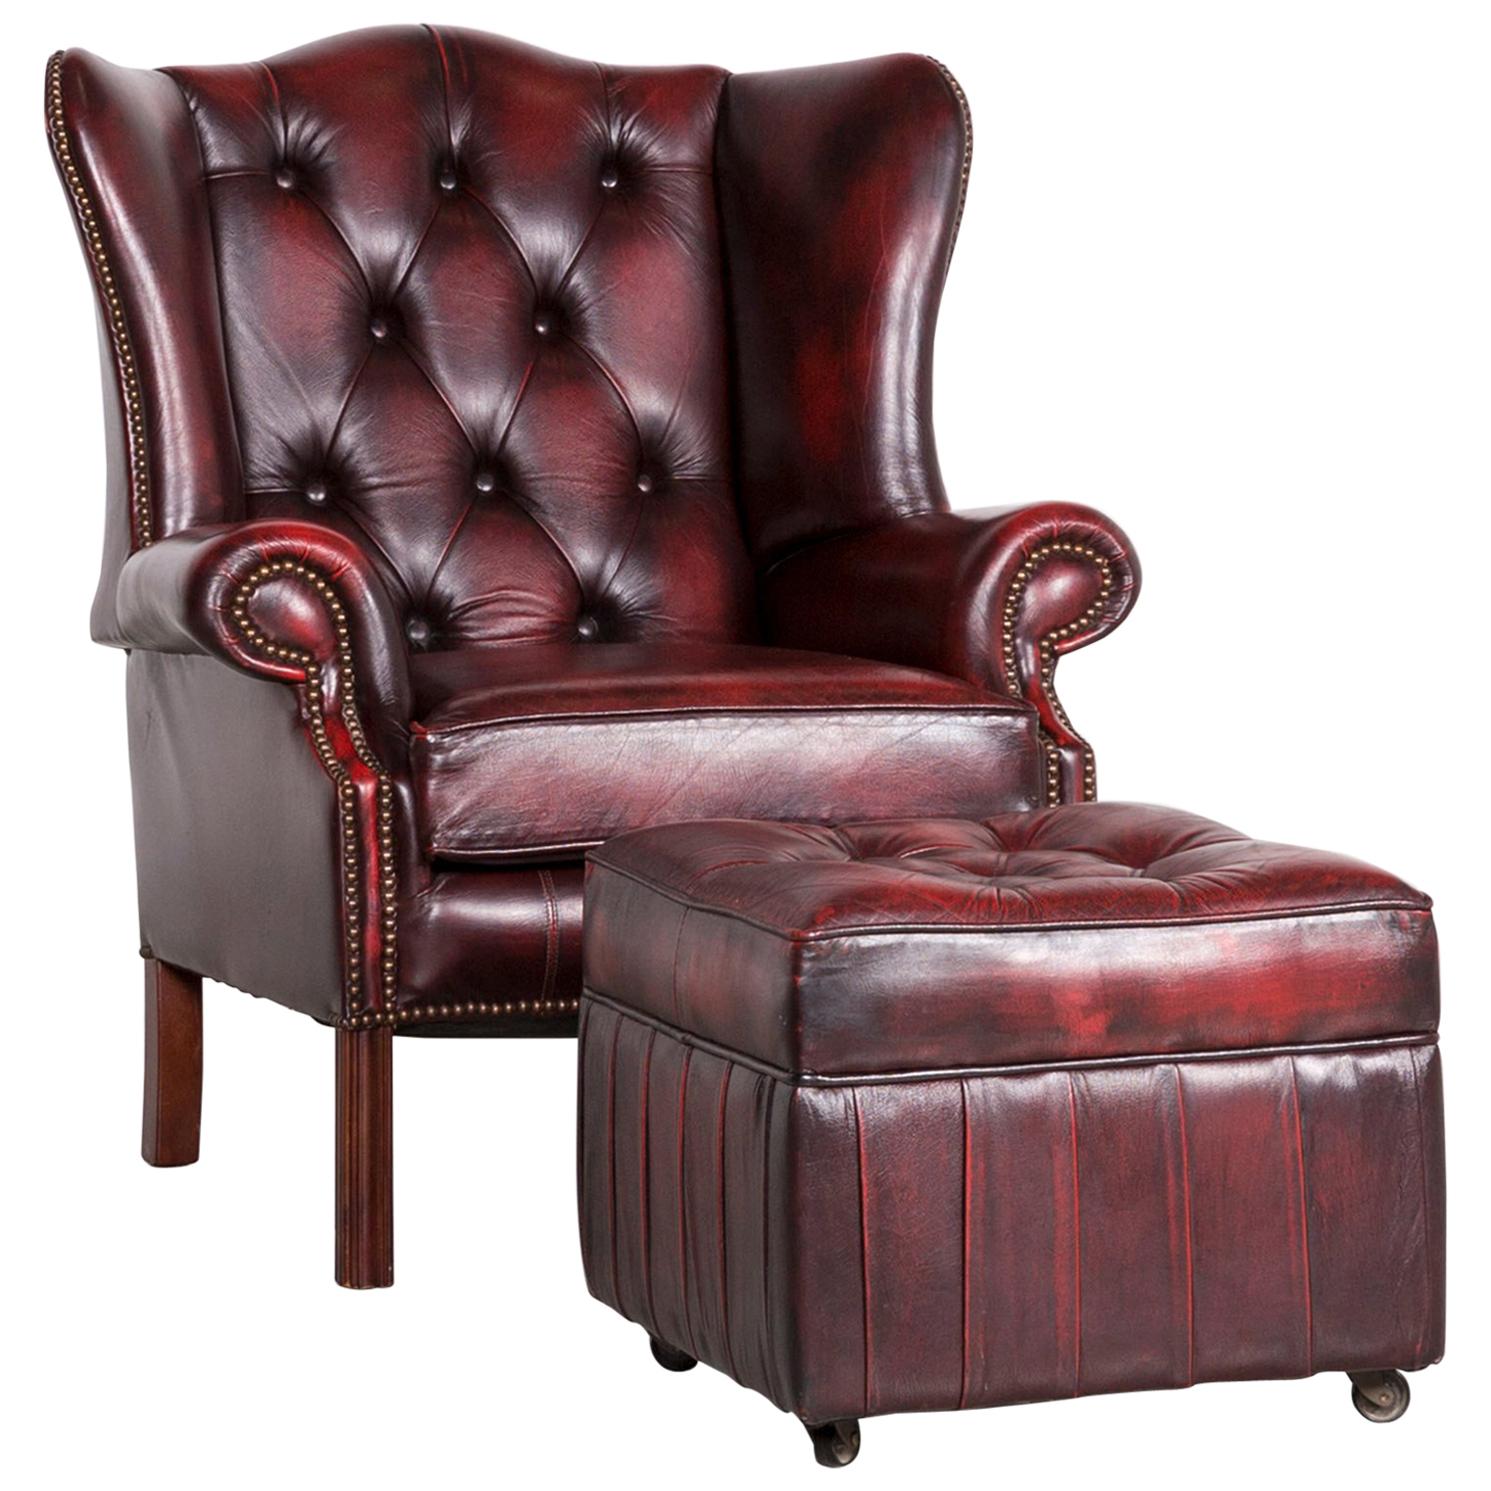 Centurion Chesterfield Leather Armchair Footstool Set Red Vintage